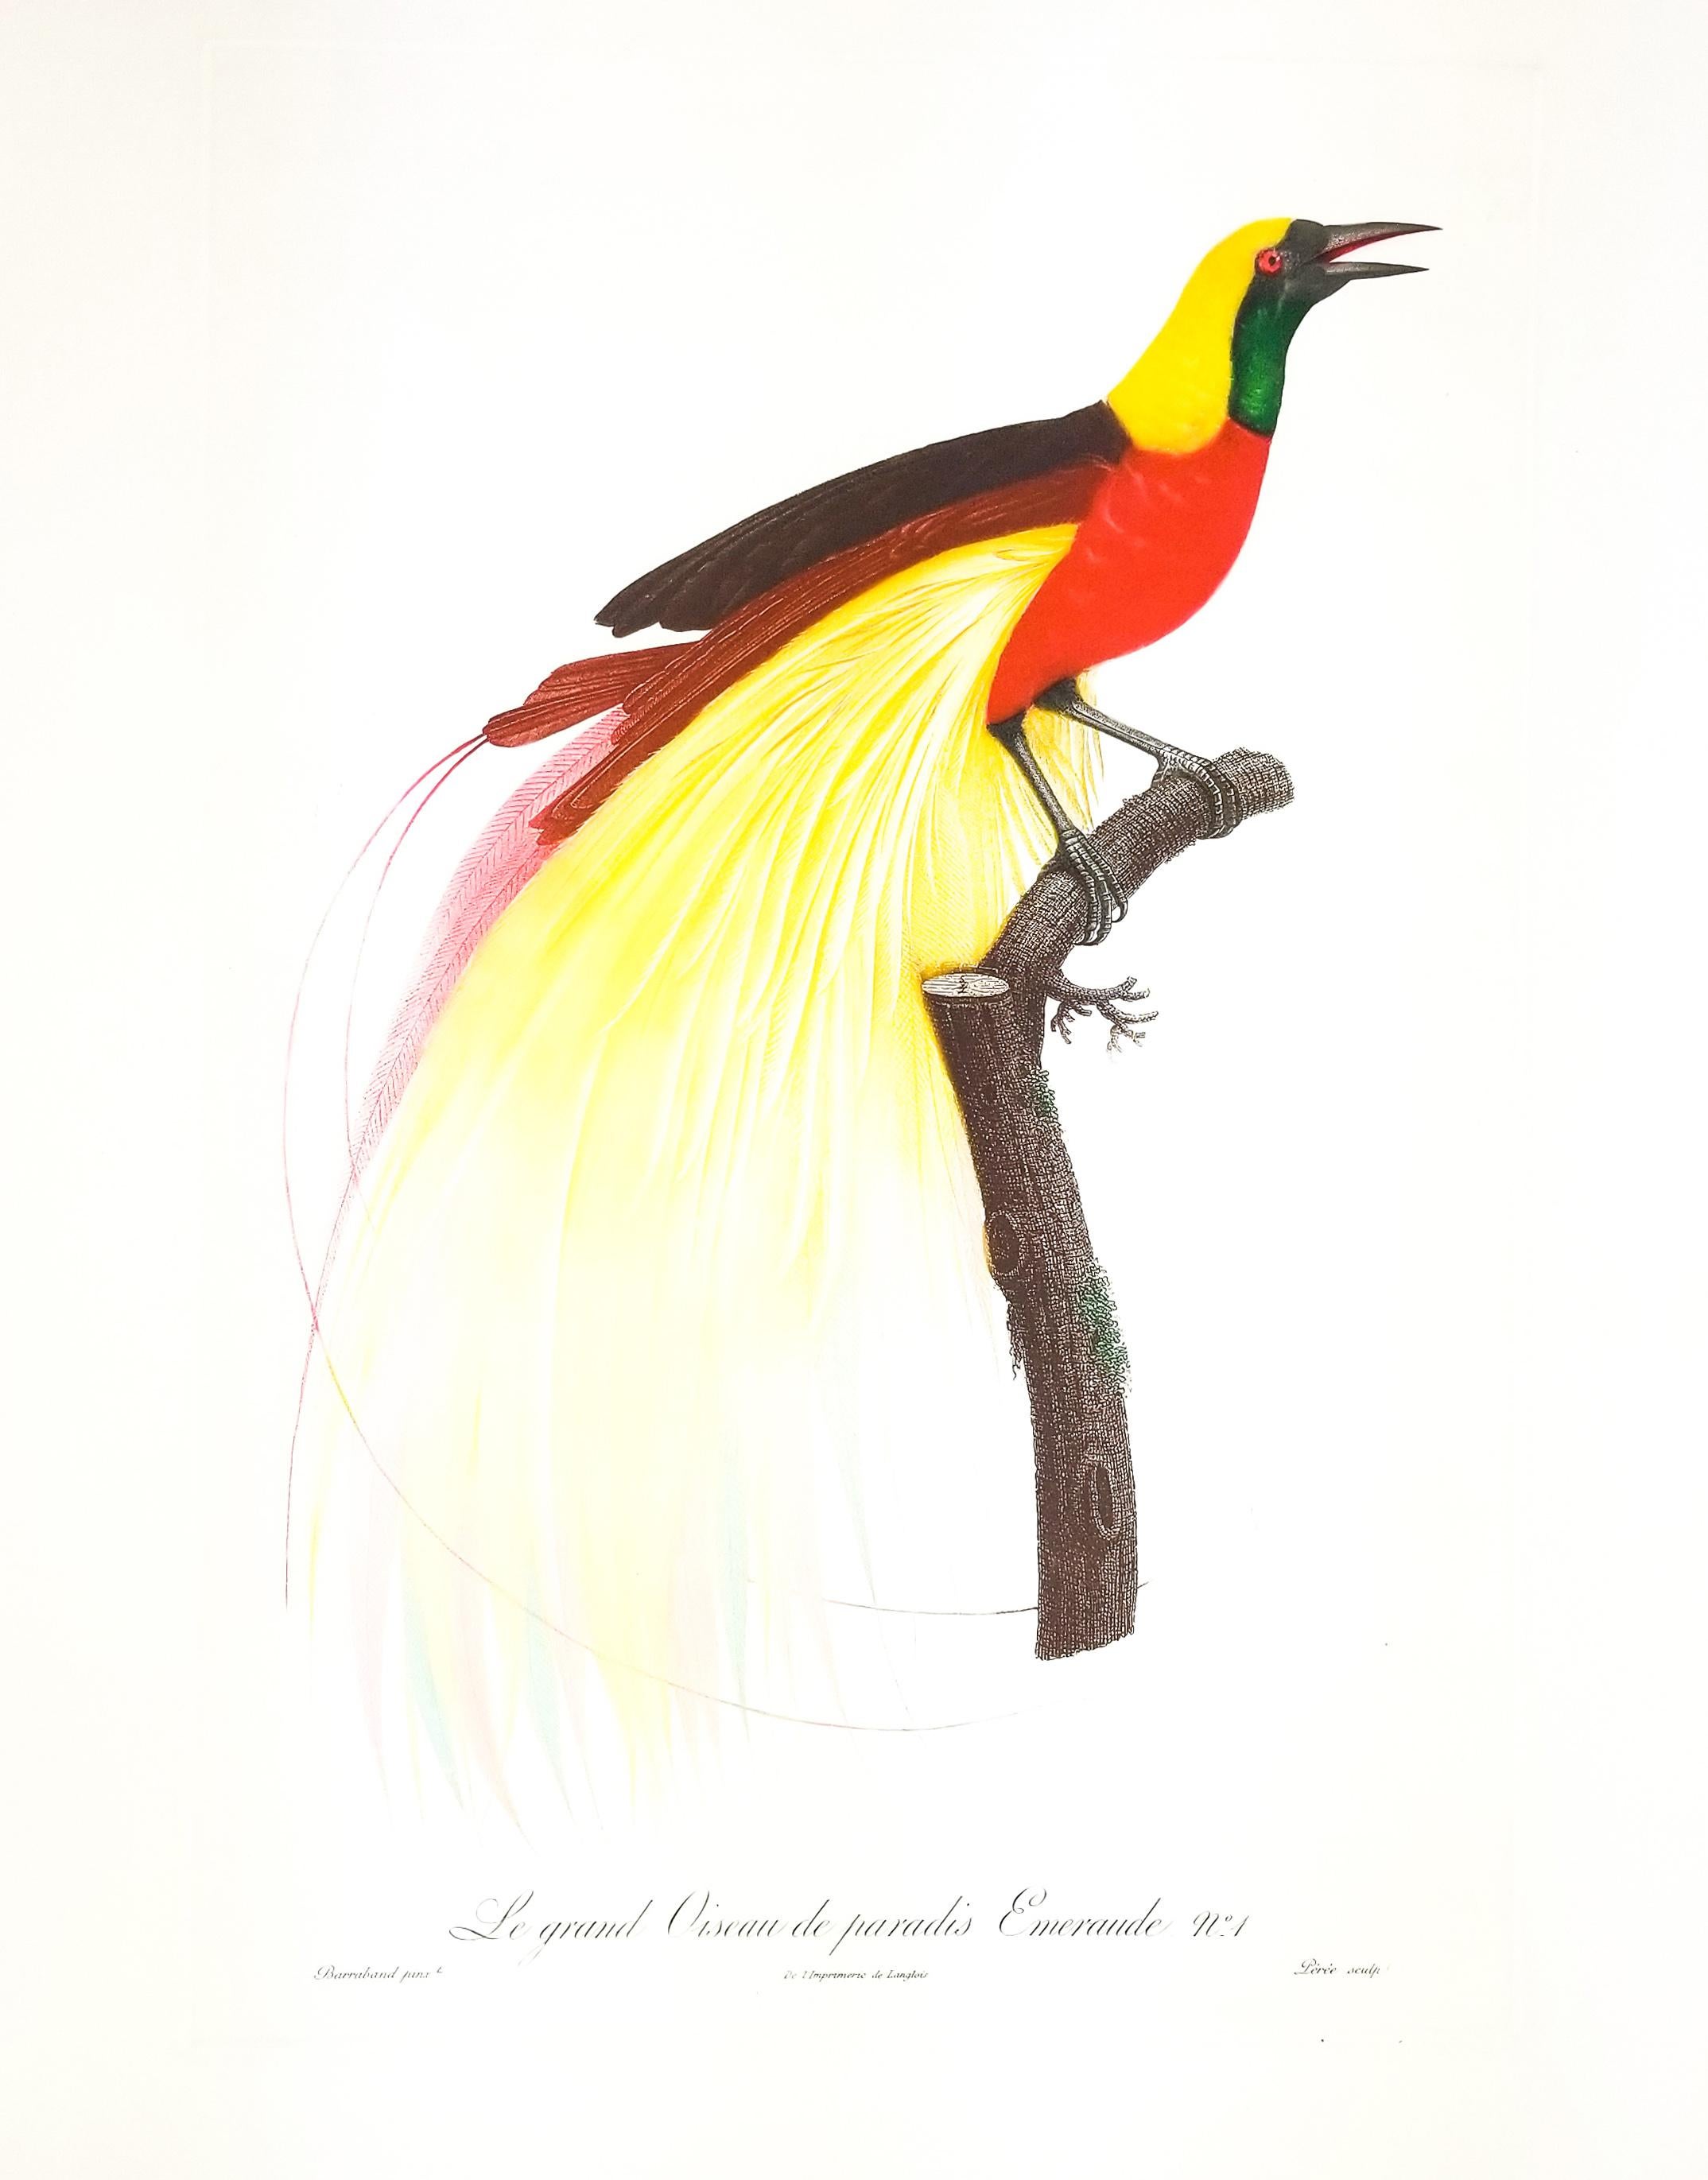 Duet of Big Birds of Paradise 1 and 2 - Print by Jacques Barraband